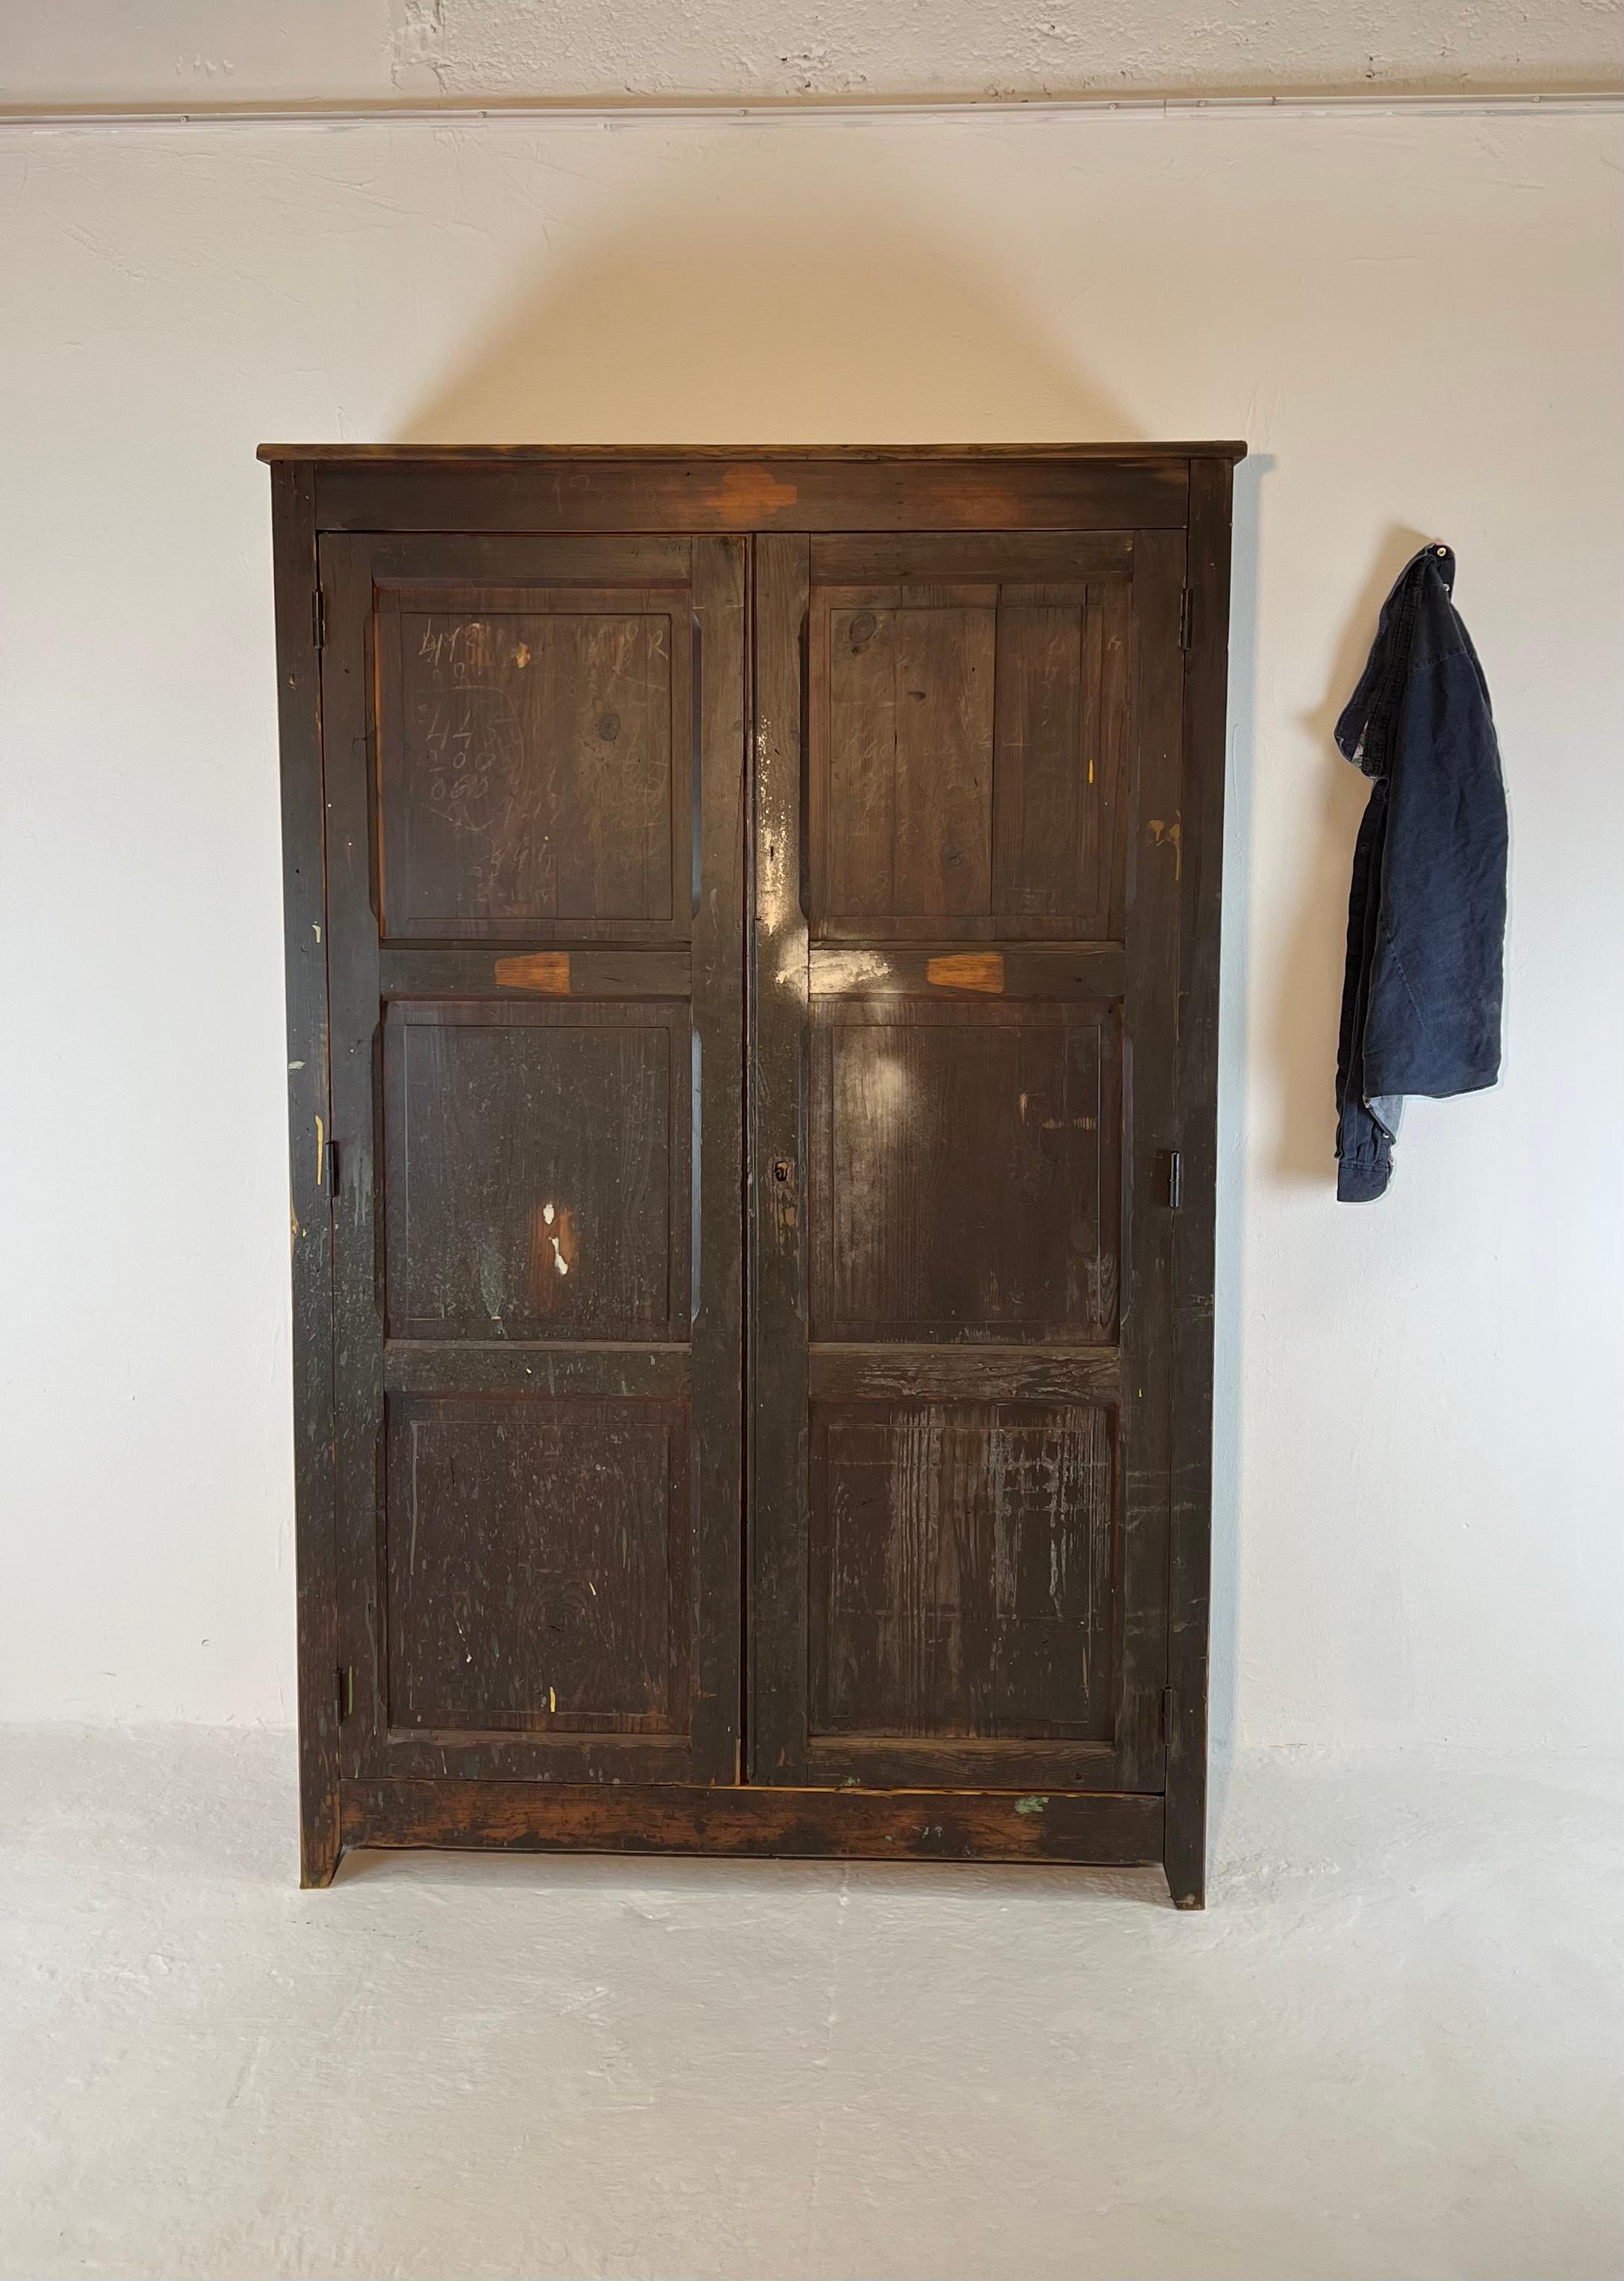 Superb industrial cabinet from the 1950s in pine, completely restored. The whole has been sanded and/or thoroughly cleaned depending on the area, then completely treated and varnished for an authentic finish. You have a unique piece of furniture